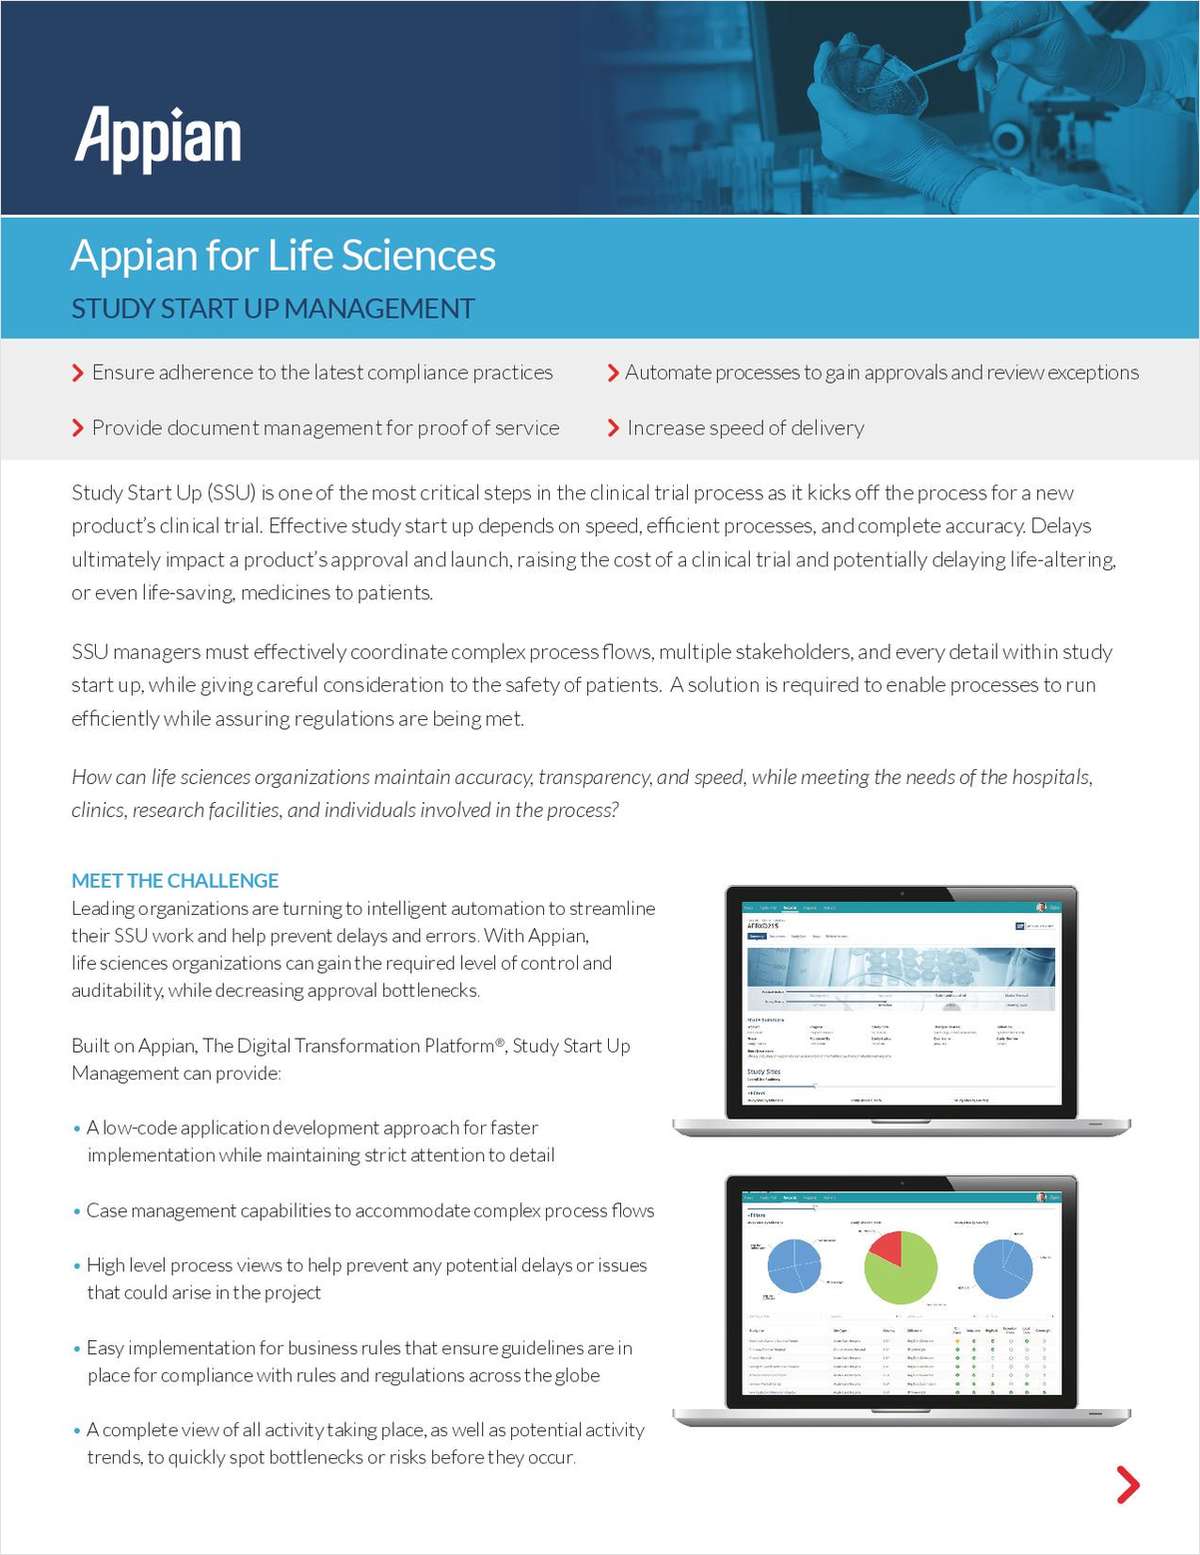 Appian for Life Sciences: Study Start Up